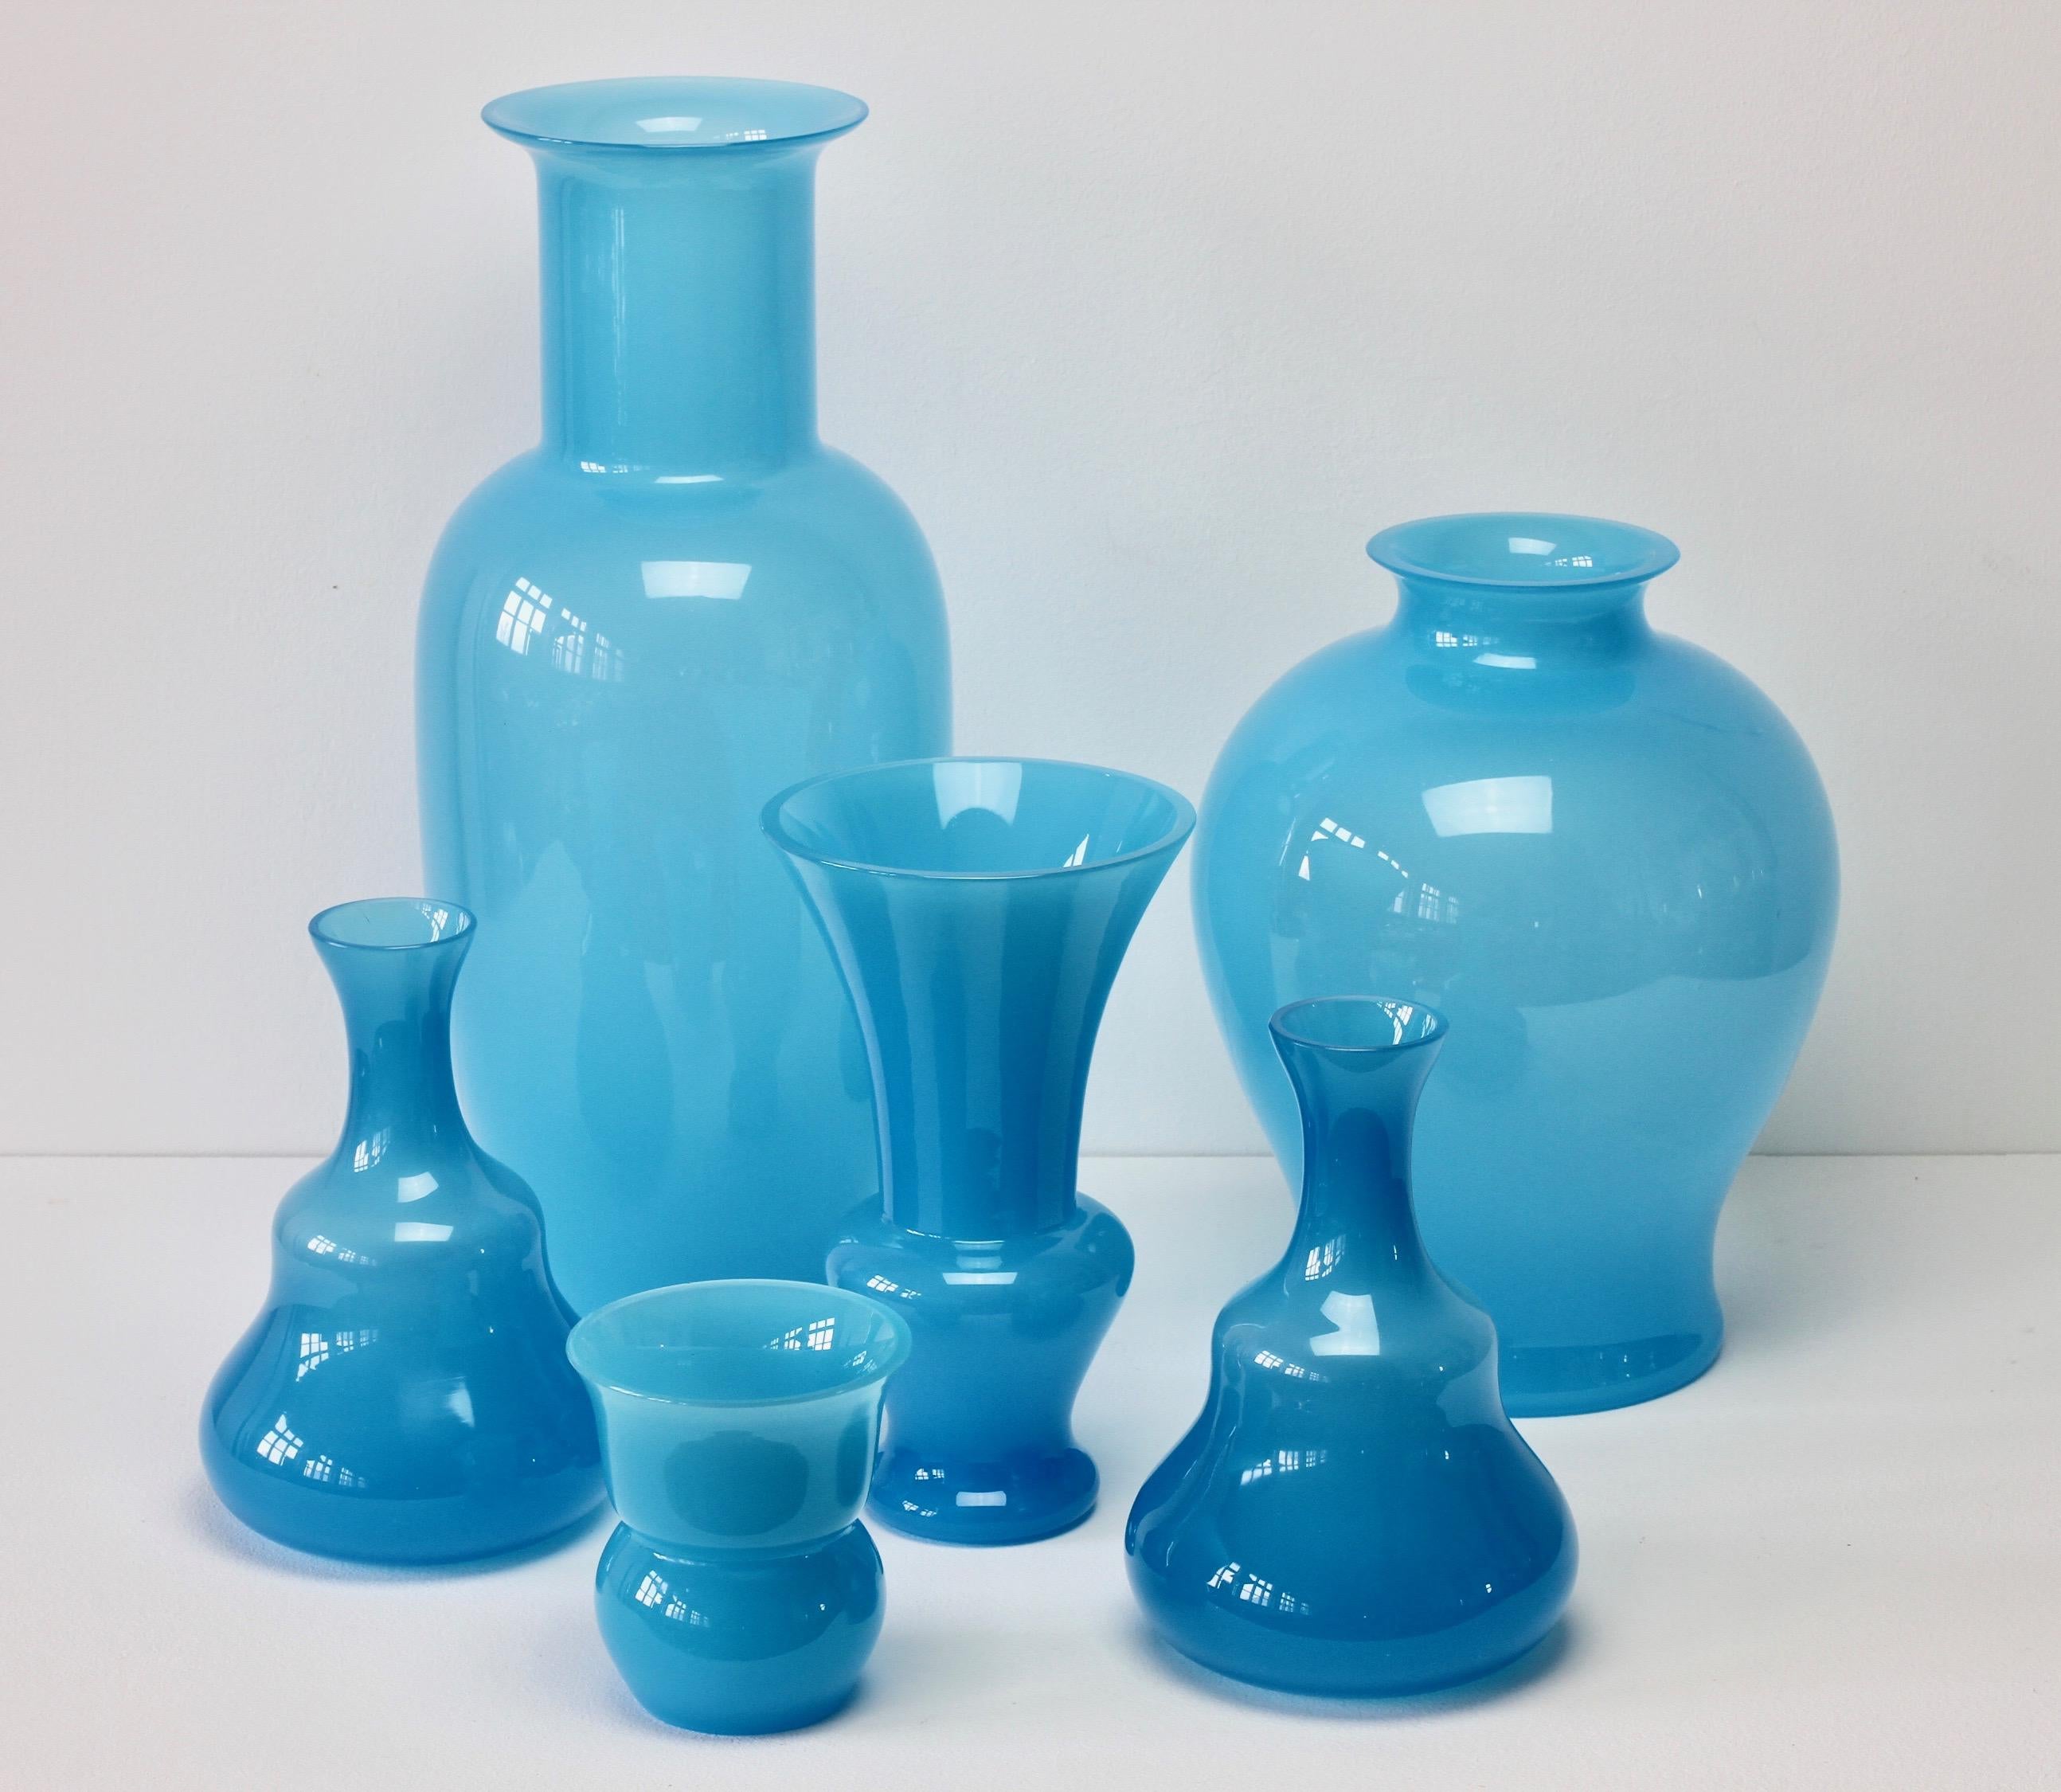 Cenedese set, group, ensemble or collection of vintage midcentury Murano glass vases or vessels, made in Italy, circa 1970-1990. Particularly striking is the light opaline blue colour / color as well as the forms and large sizes, they have all the